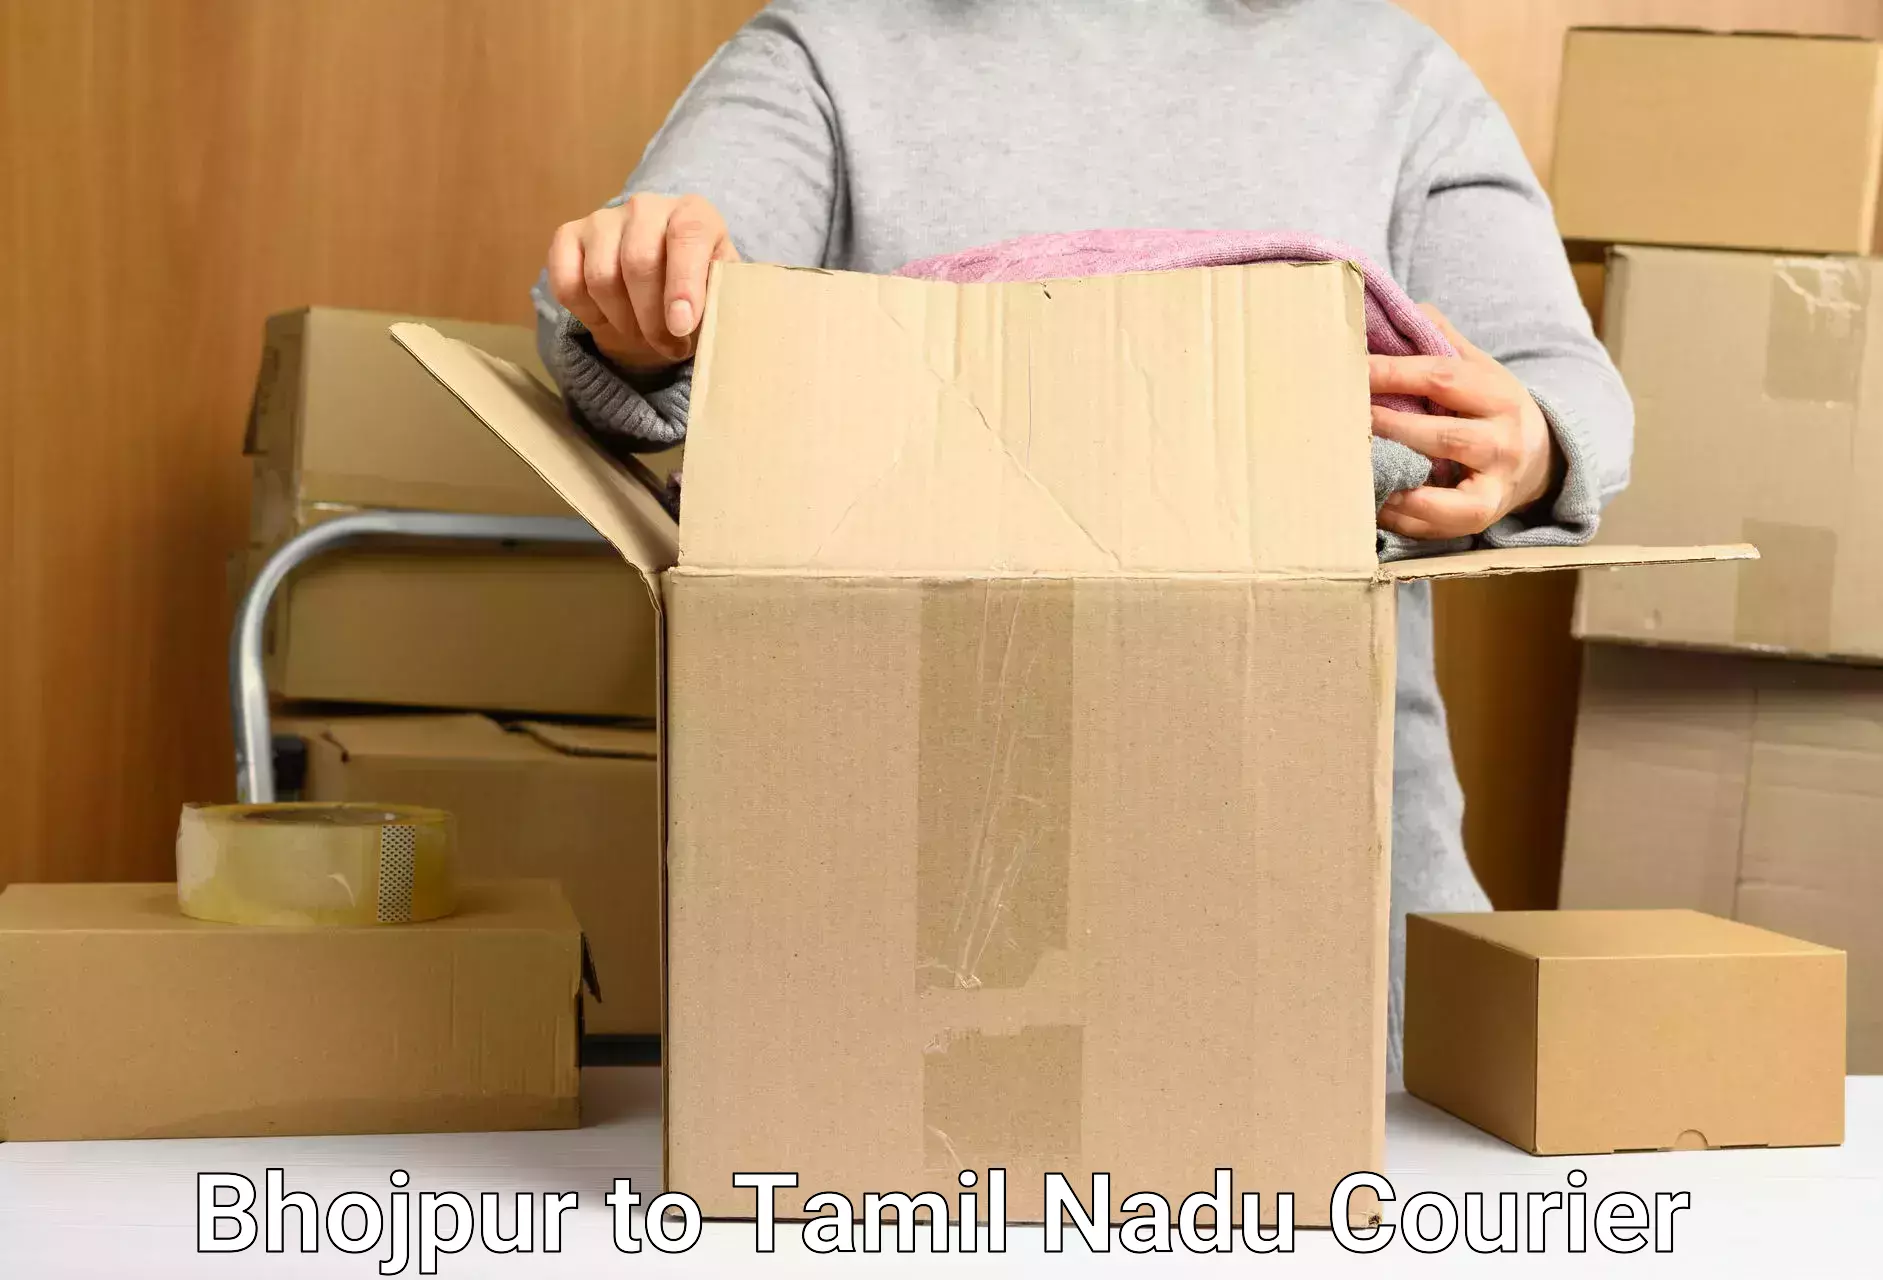 Express delivery capabilities Bhojpur to Tamil Nadu